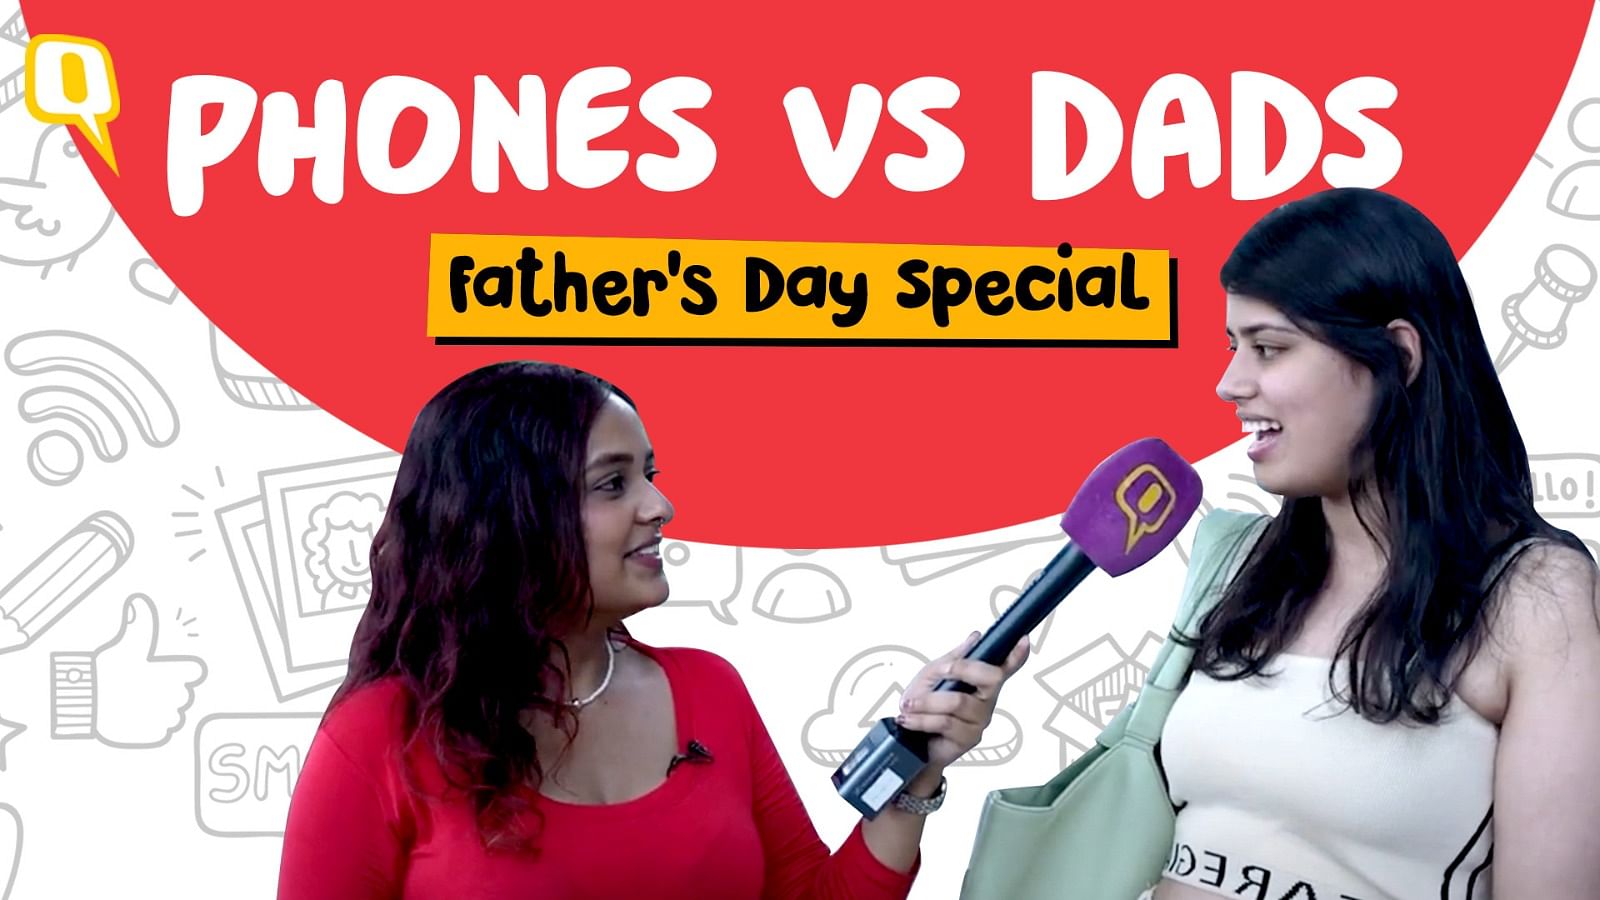 Celebrate Father’s Day with Funny Phone Idiosyncrasies [Video]